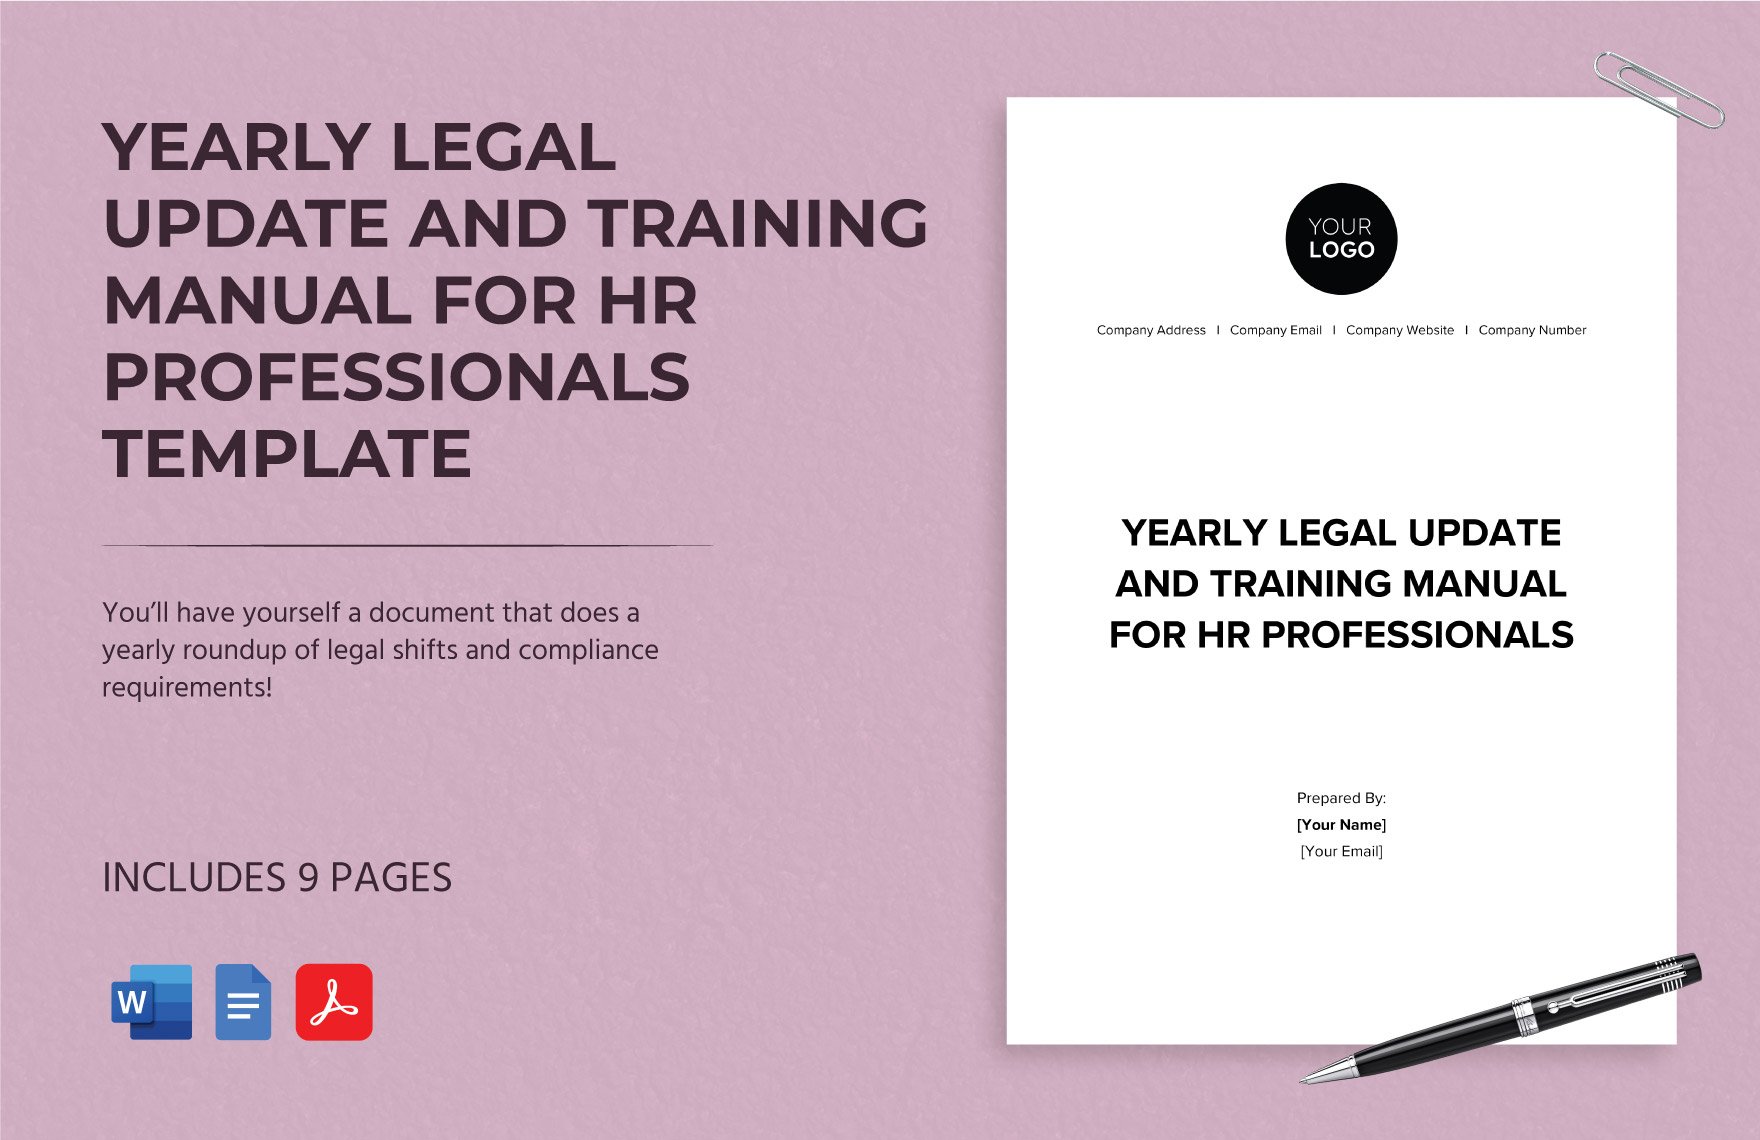 Yearly Legal Update and Training Manual for HR Professionals Template in Word, Google Docs, PDF